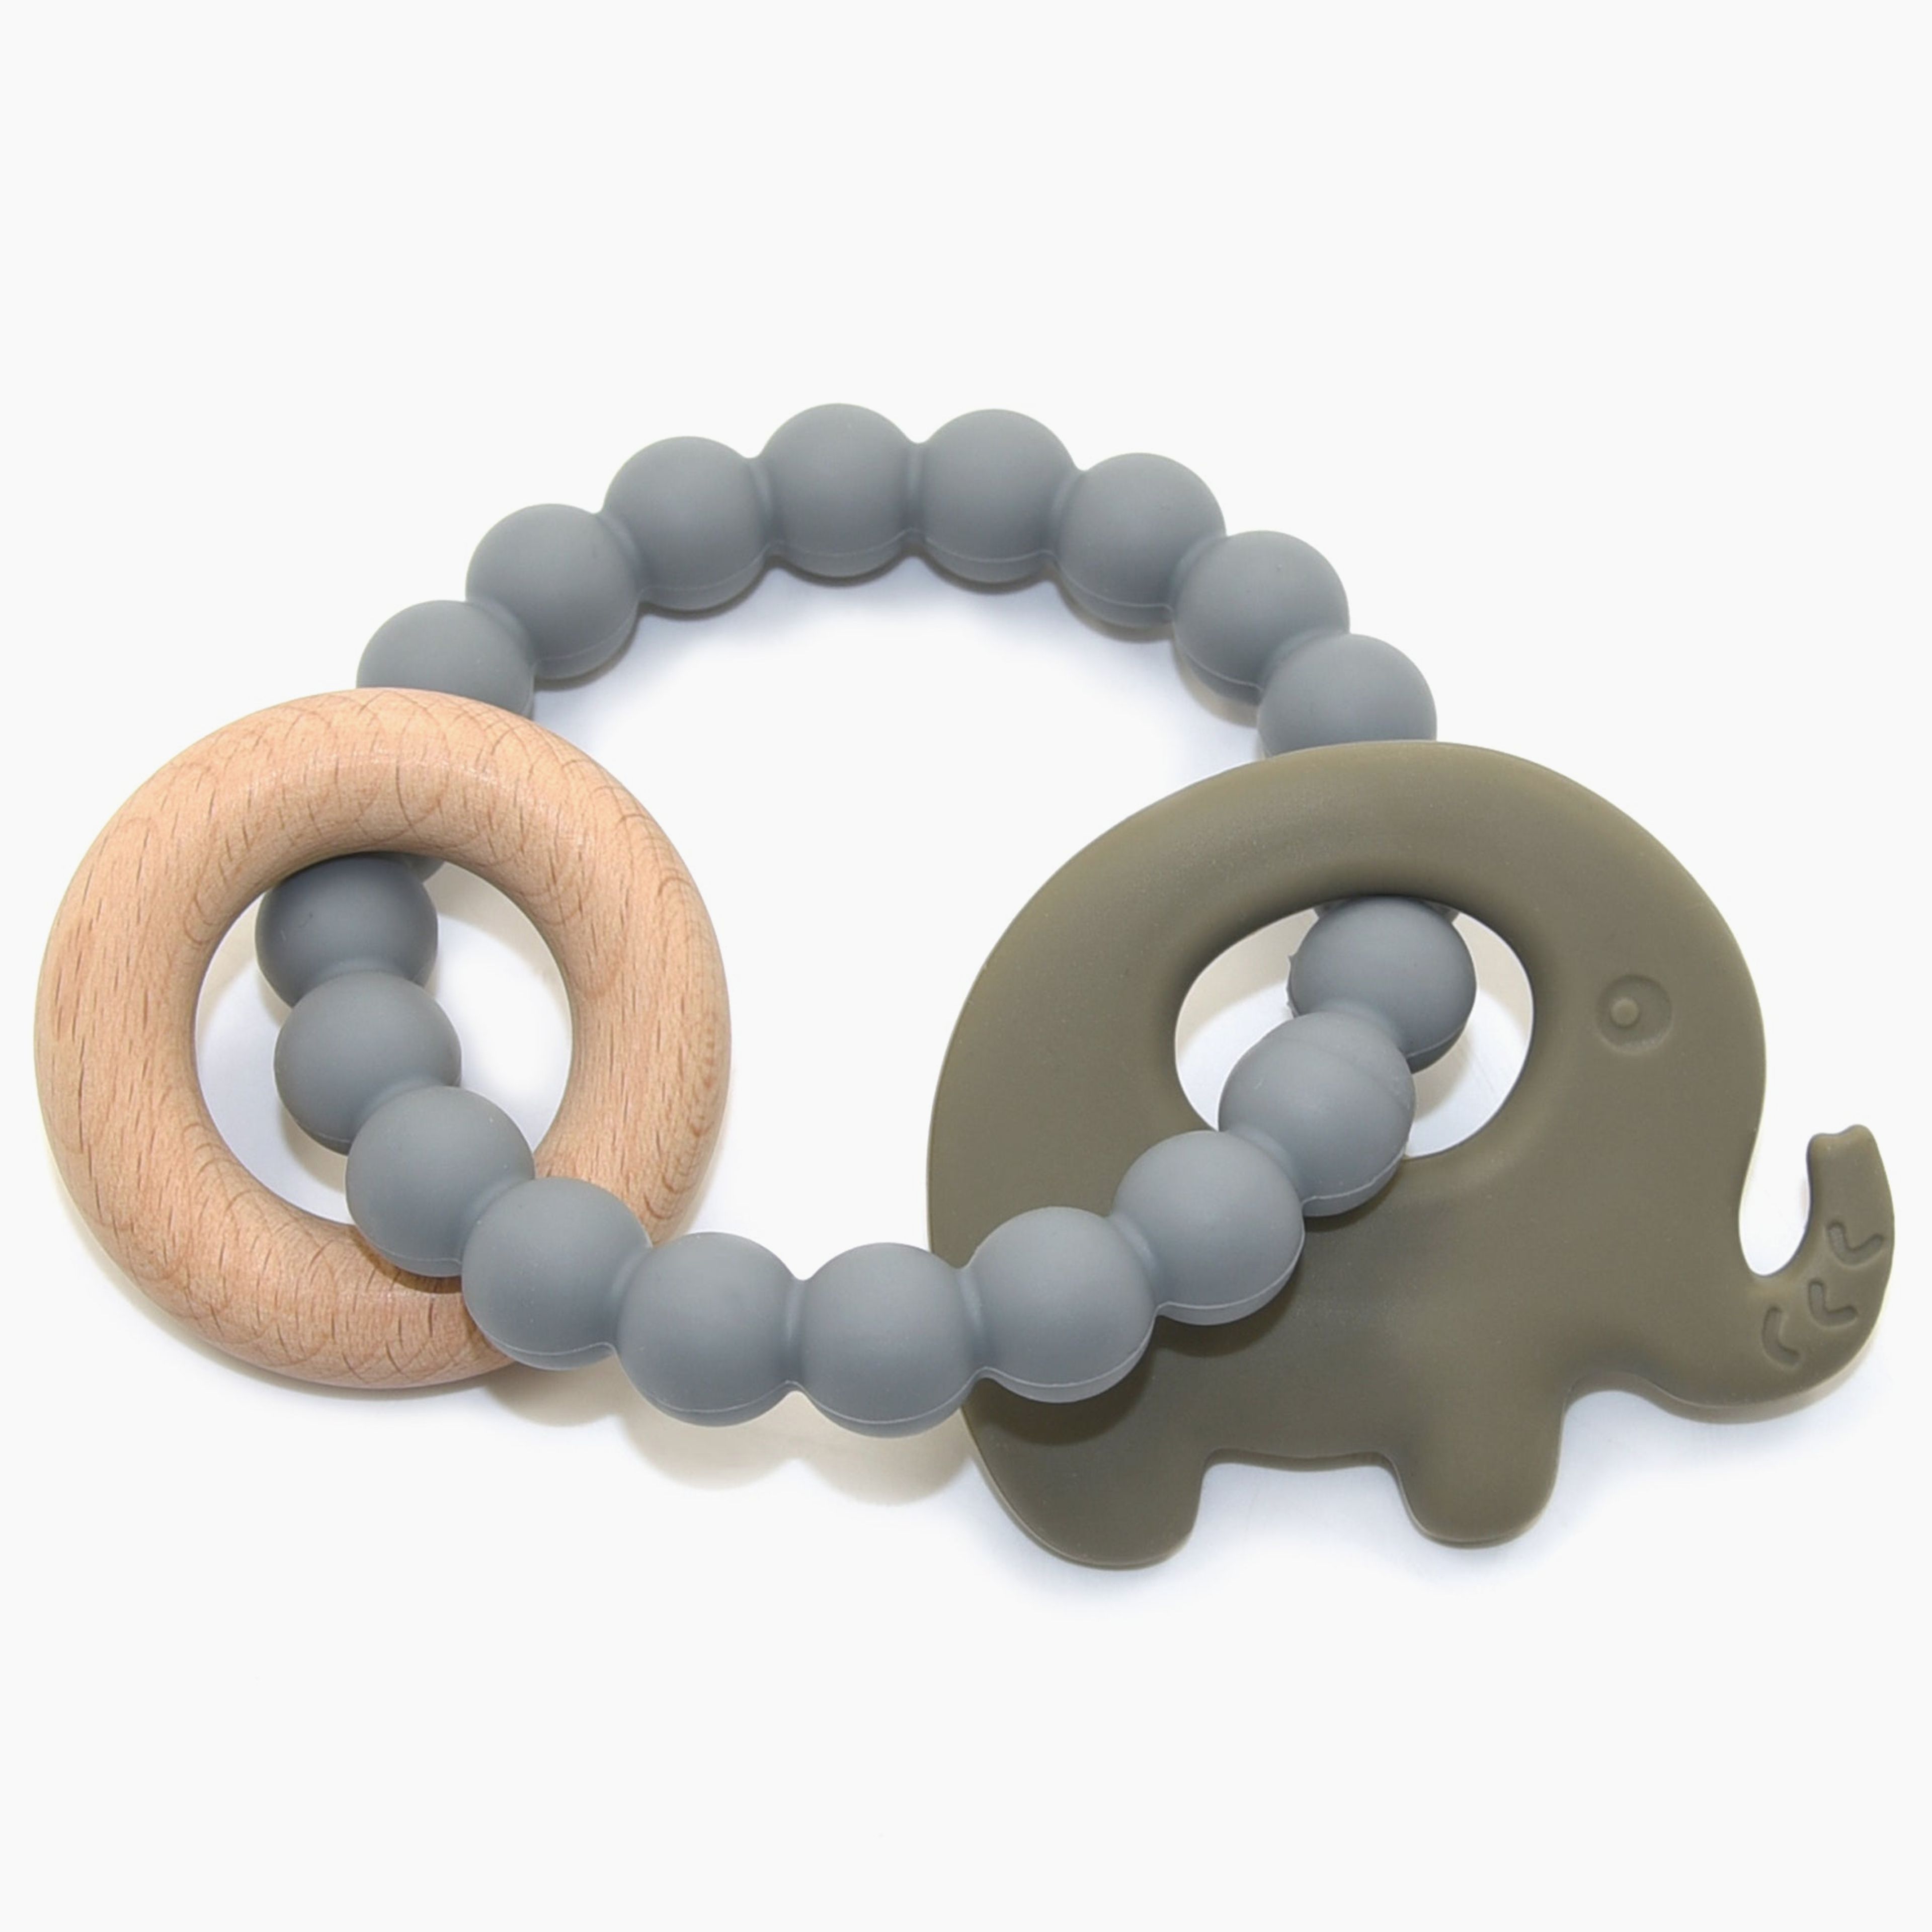 NEW! Silicone & Wood Teethers